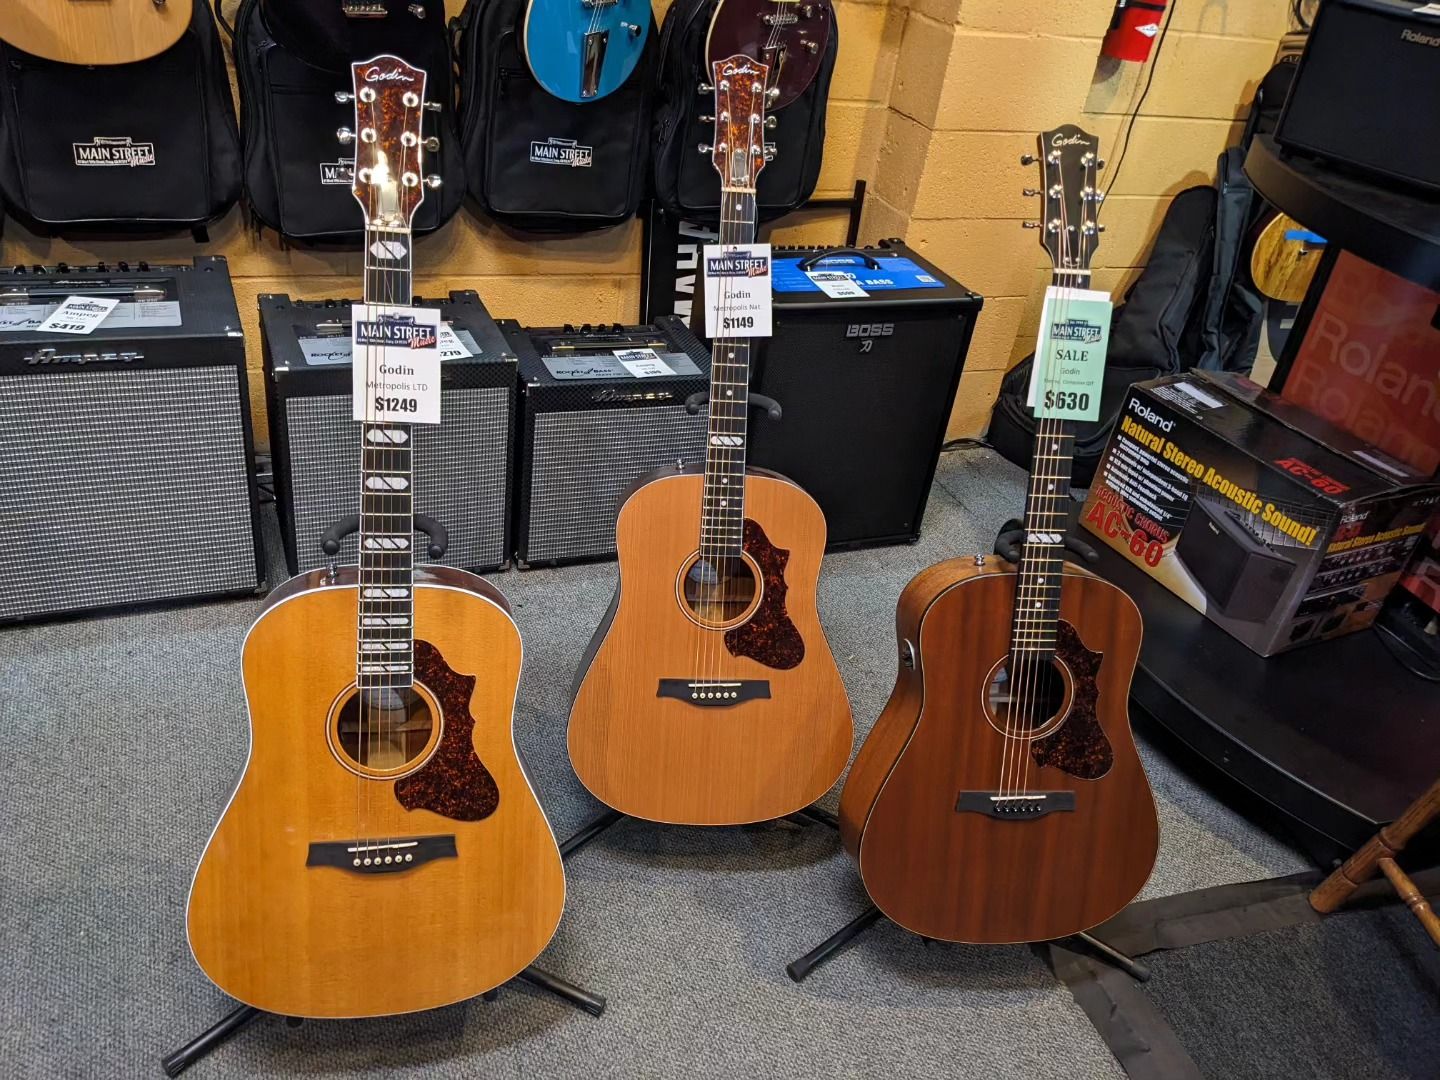 three acoustic guitars are on display in a store